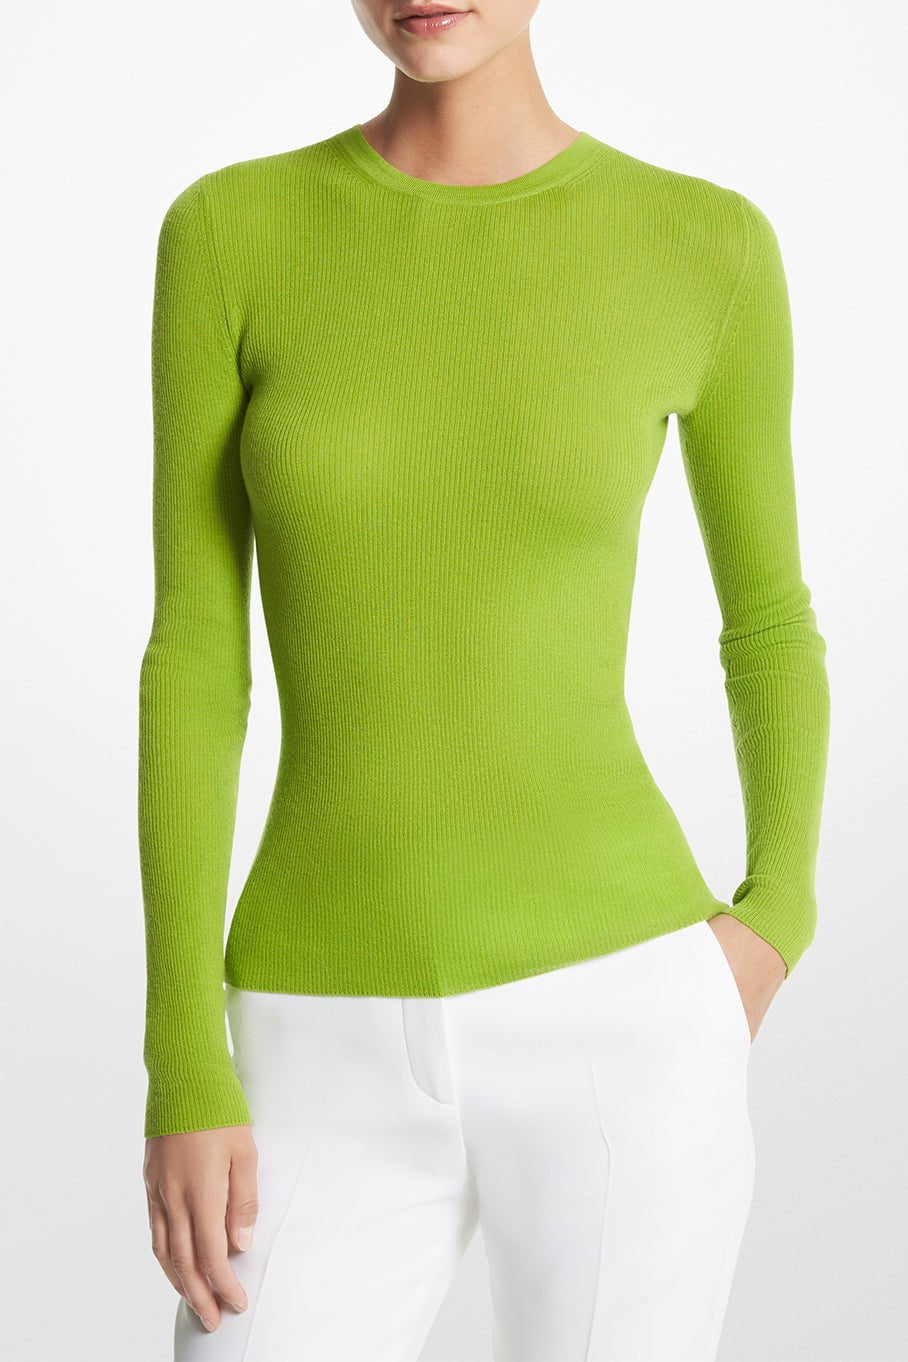 MICHAEL KORS-Hutton Pullover - Lime-